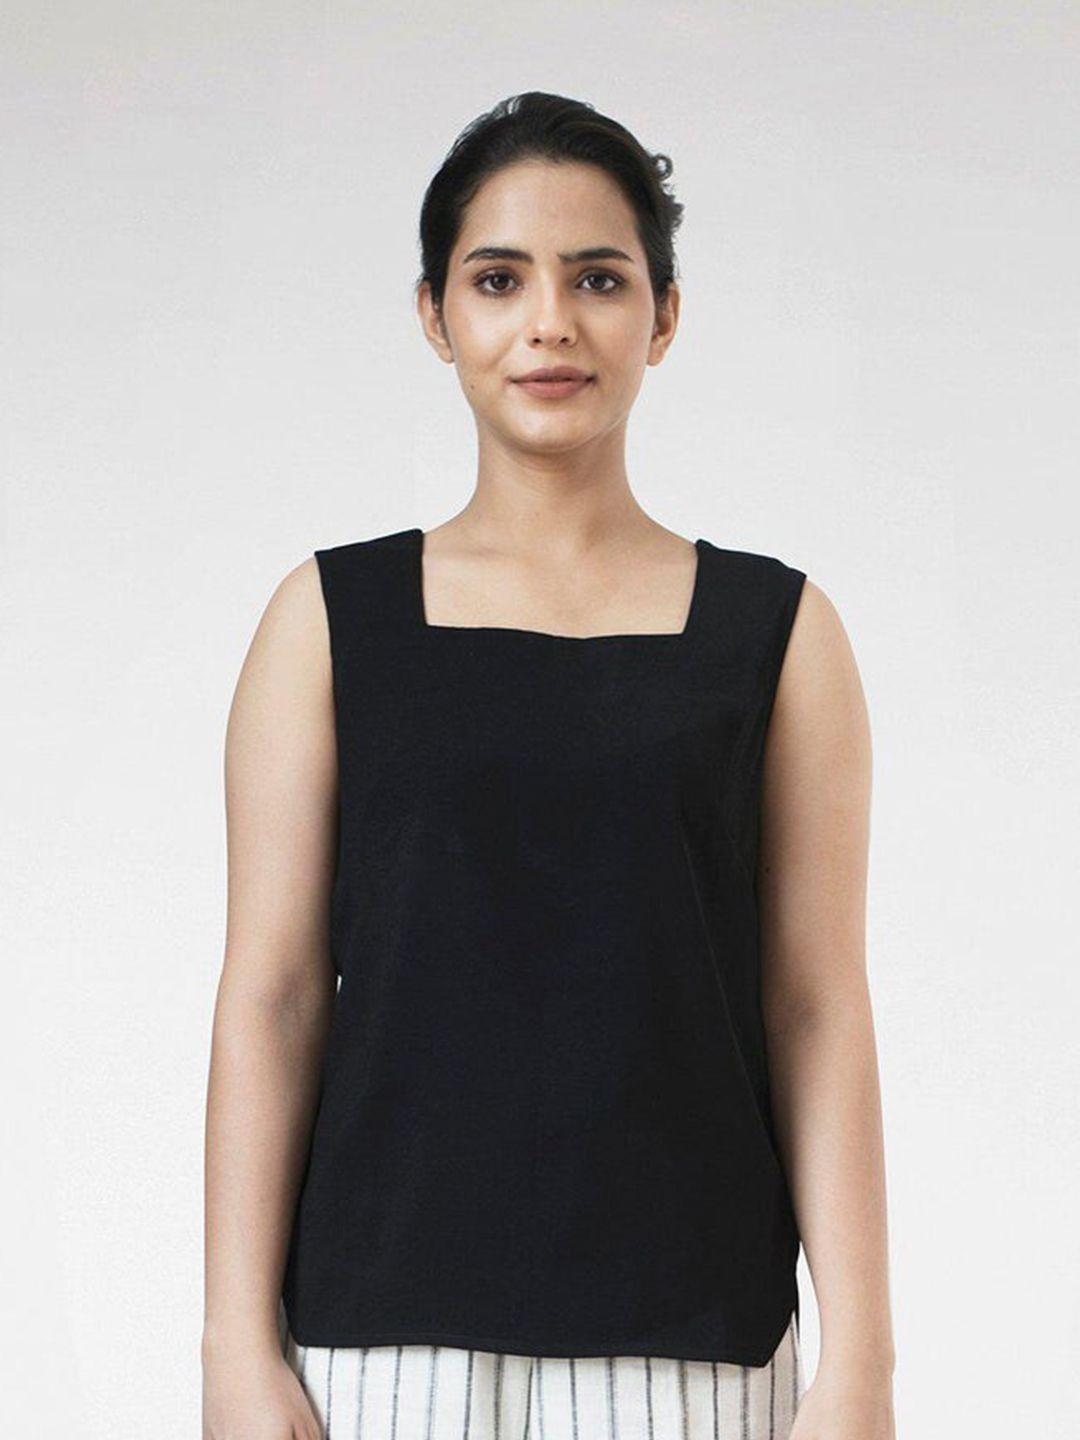 powersutra-women-black-square-neck-solid-top